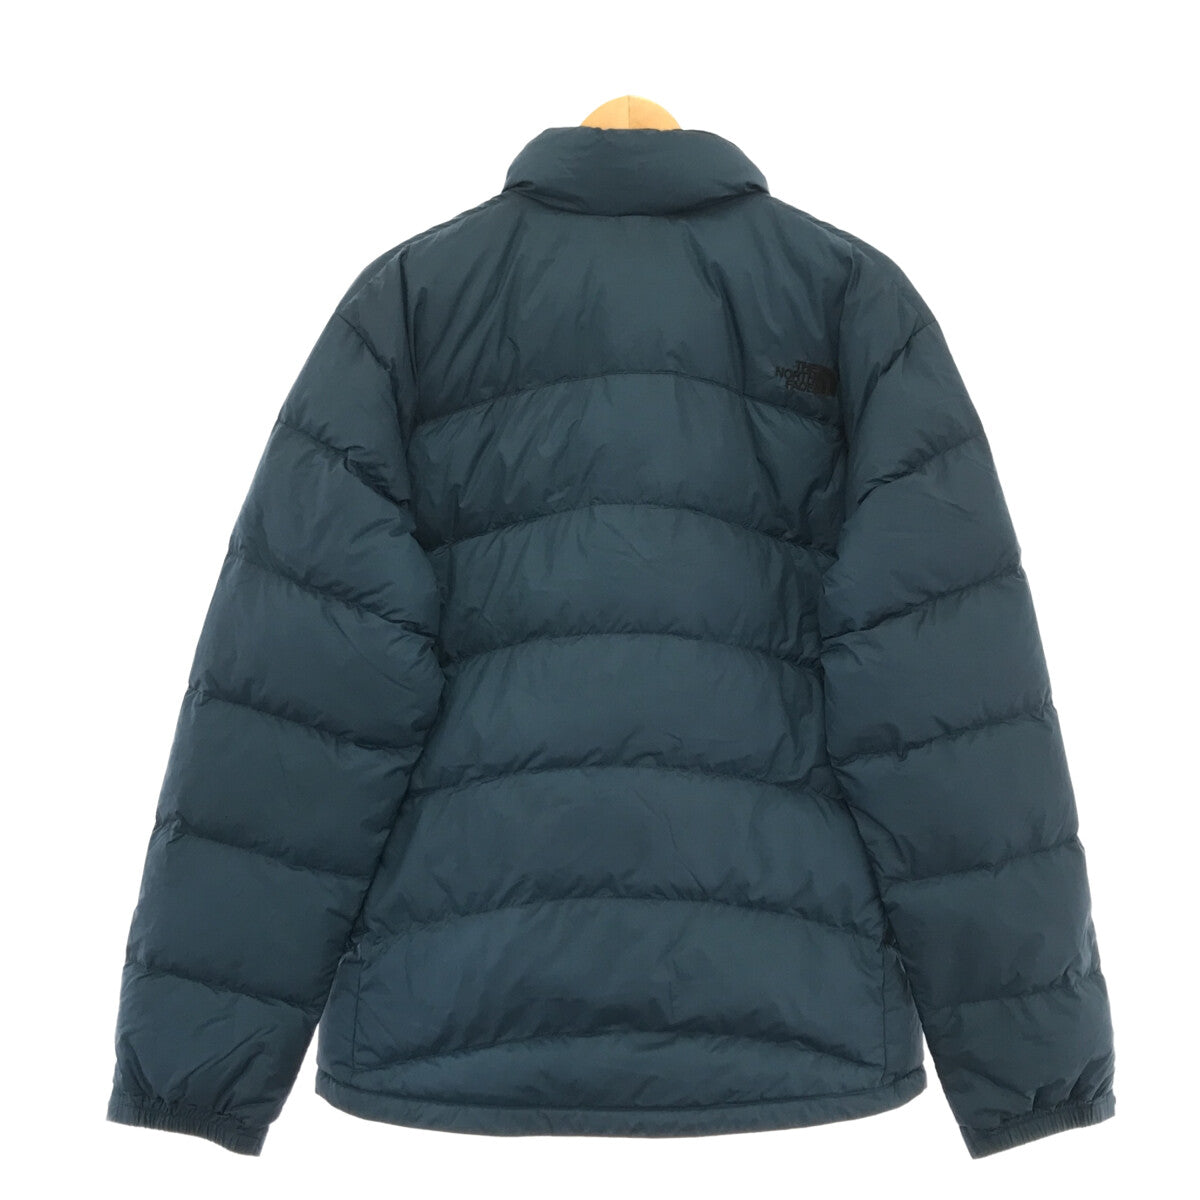 THE NORTH FACE / ザノースフェイス | Aconcagua Jacket / ND91832 